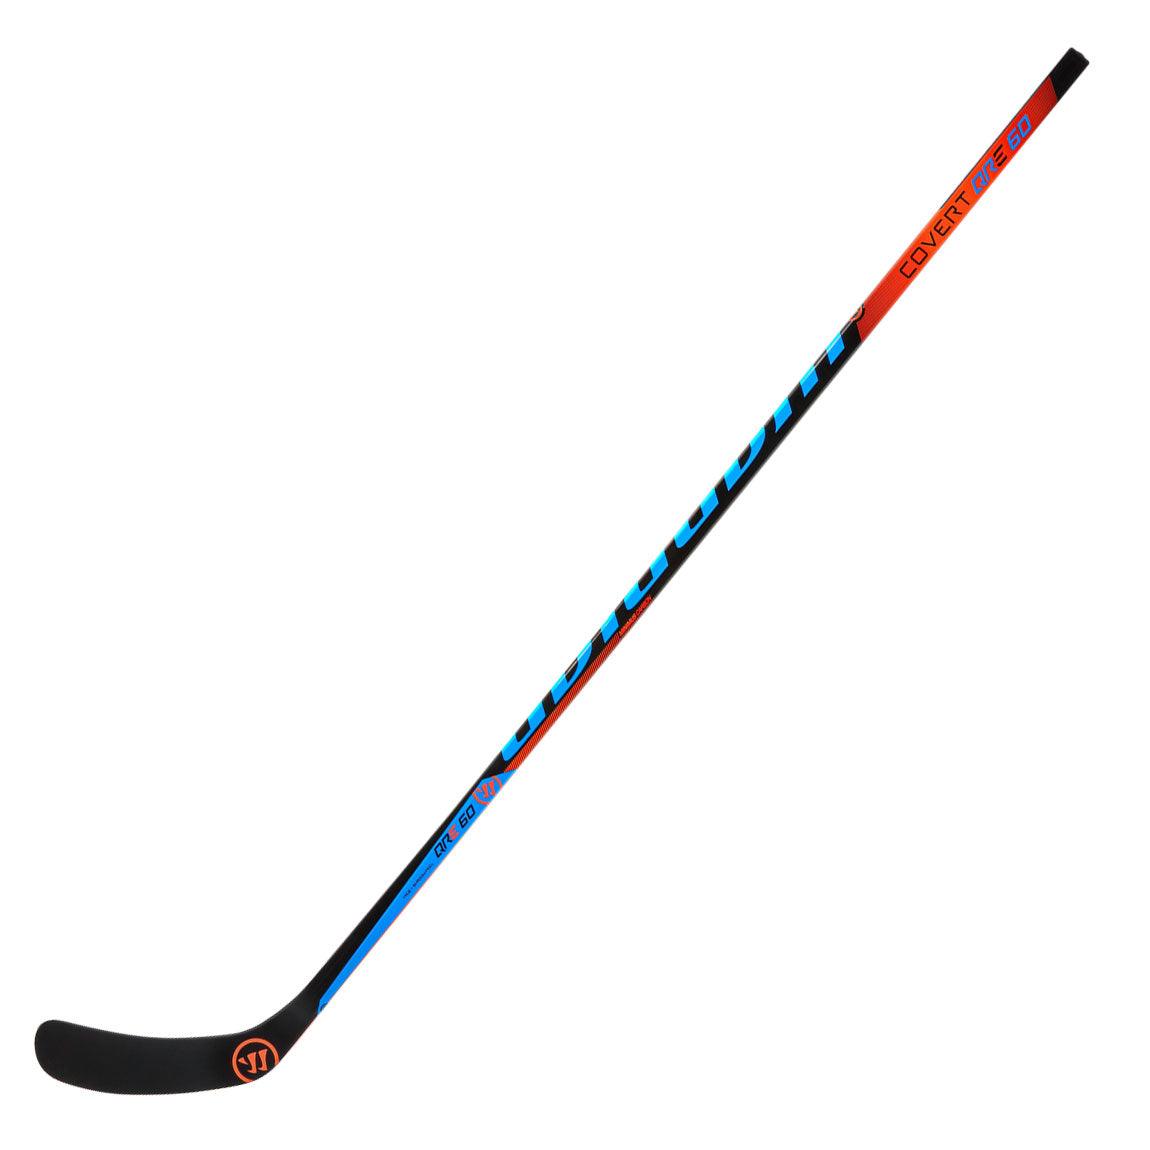 Covert QRE 60 Hockey Stick - Senior - Sports Excellence